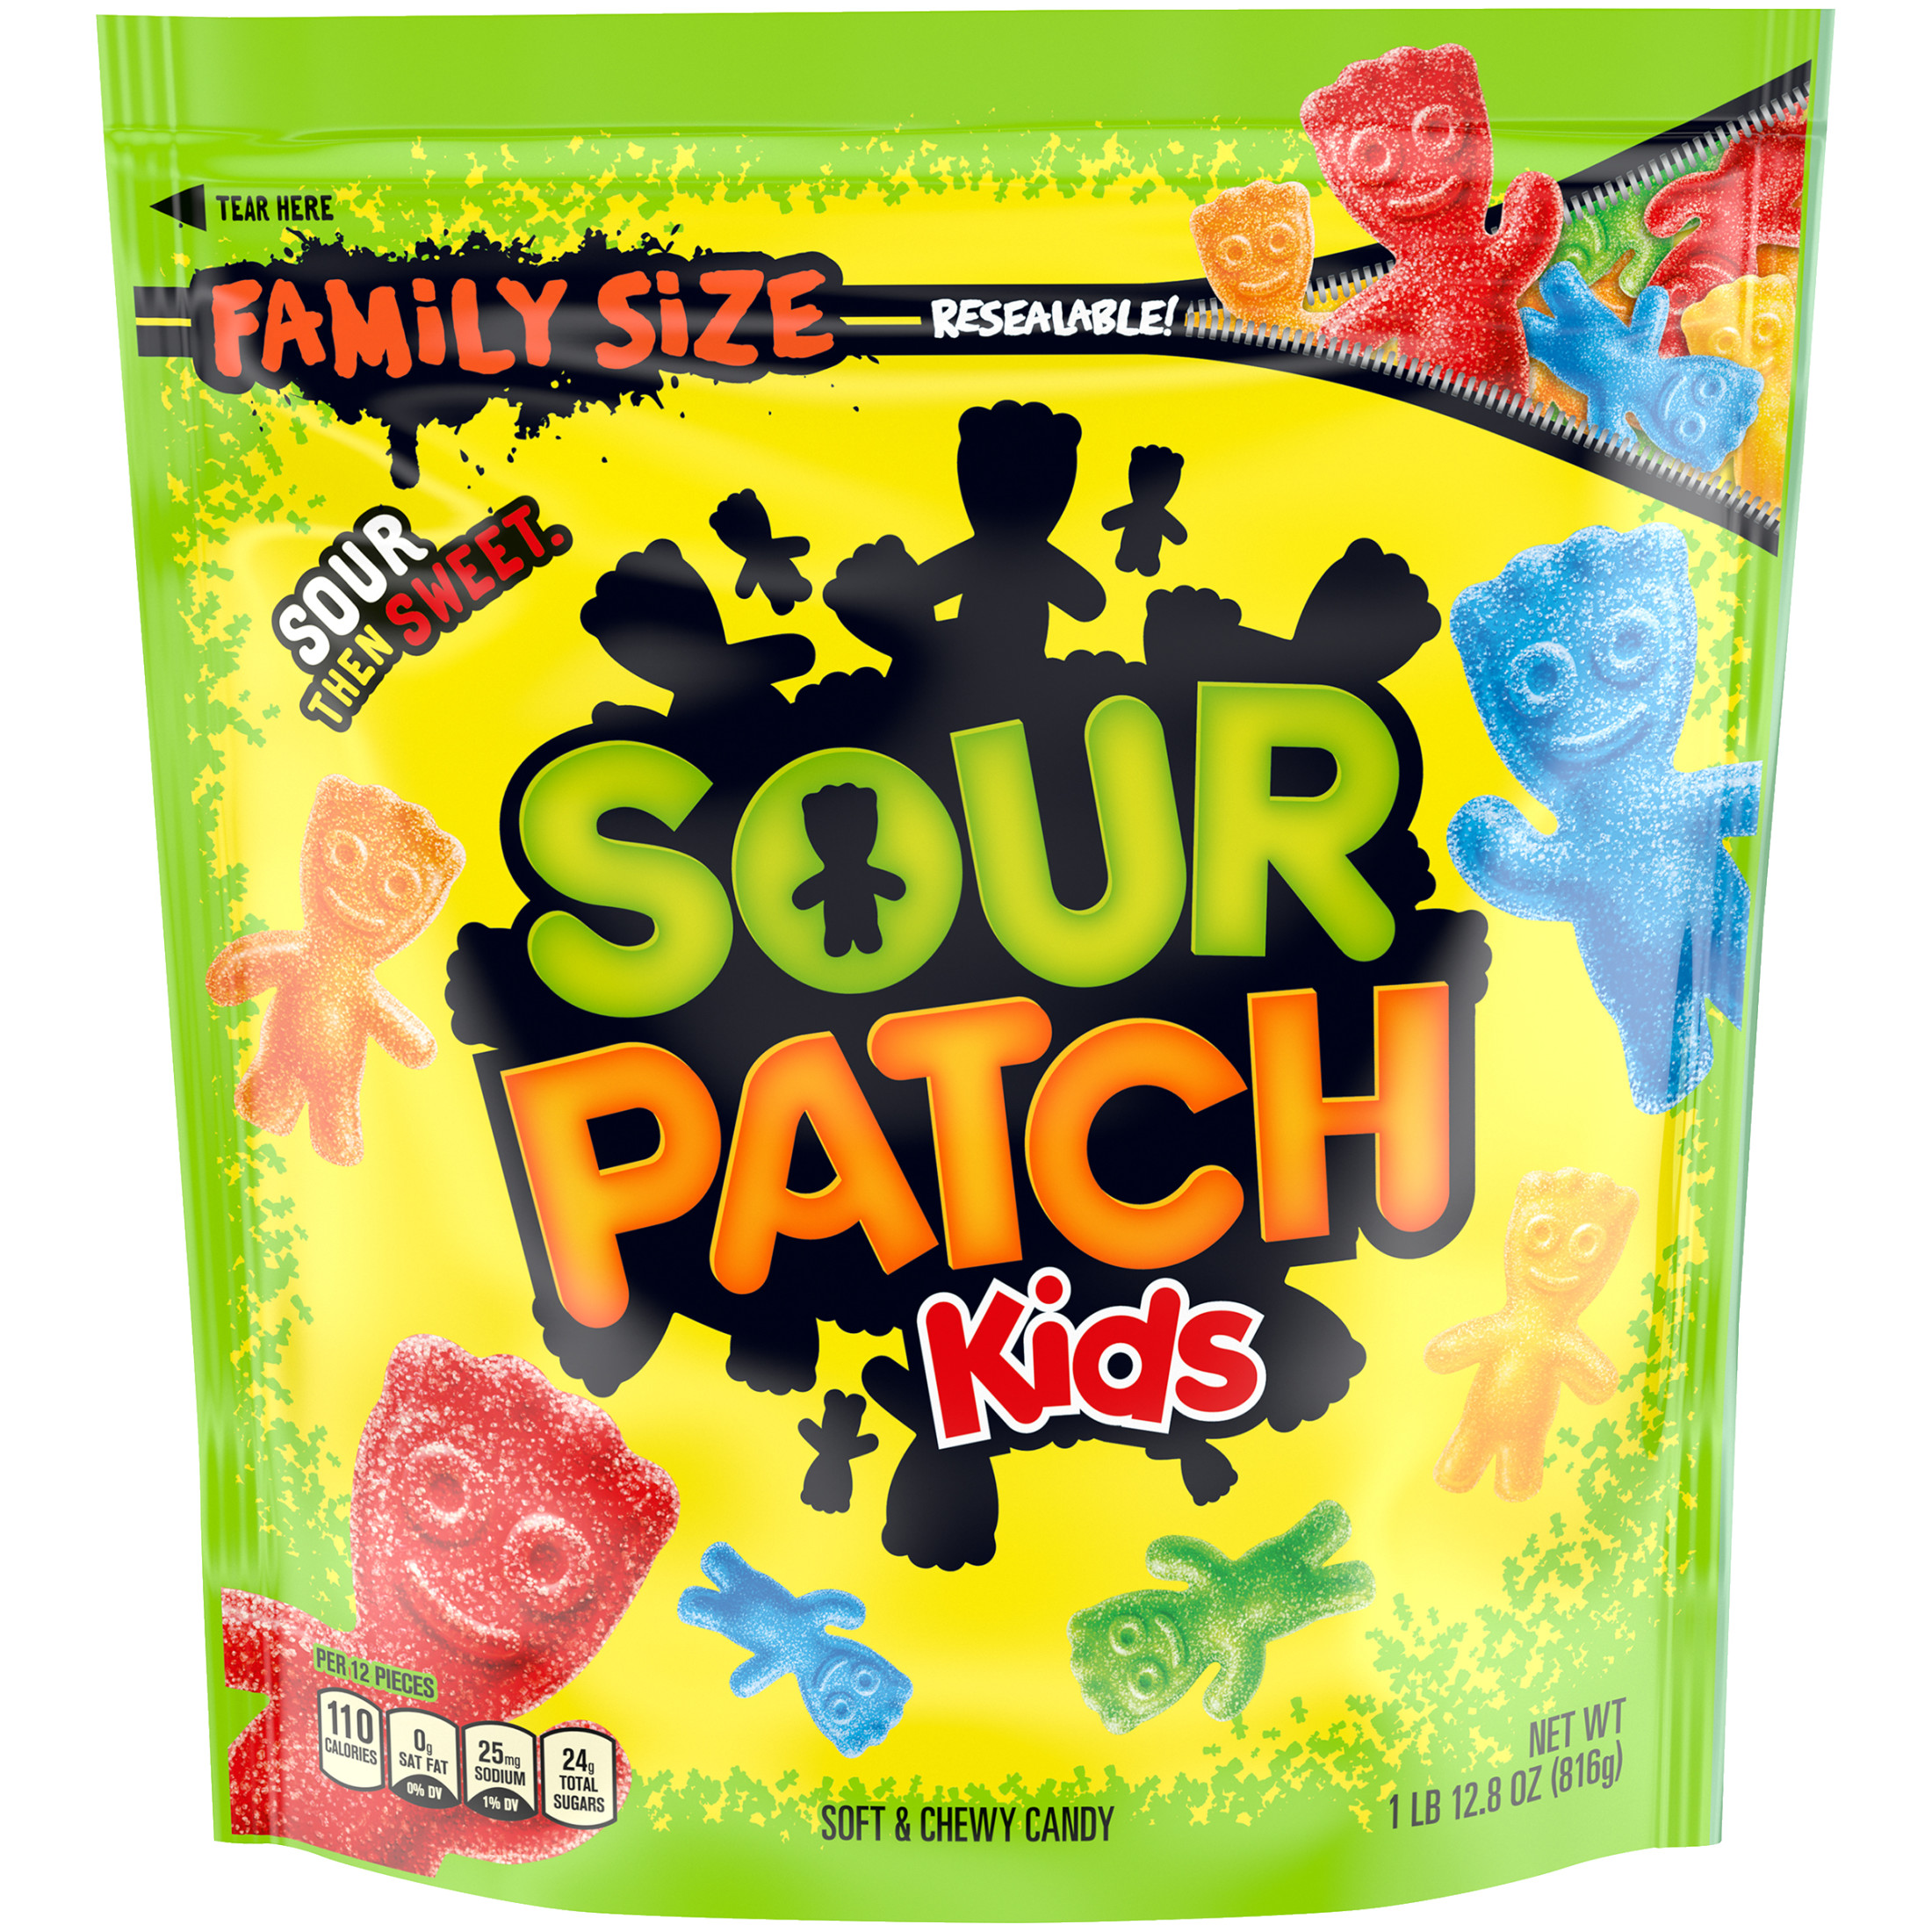 SOUR PATCH KIDS Soft & Chewy Candy, Family Size, 1.8 lb Bag - image 1 of 12